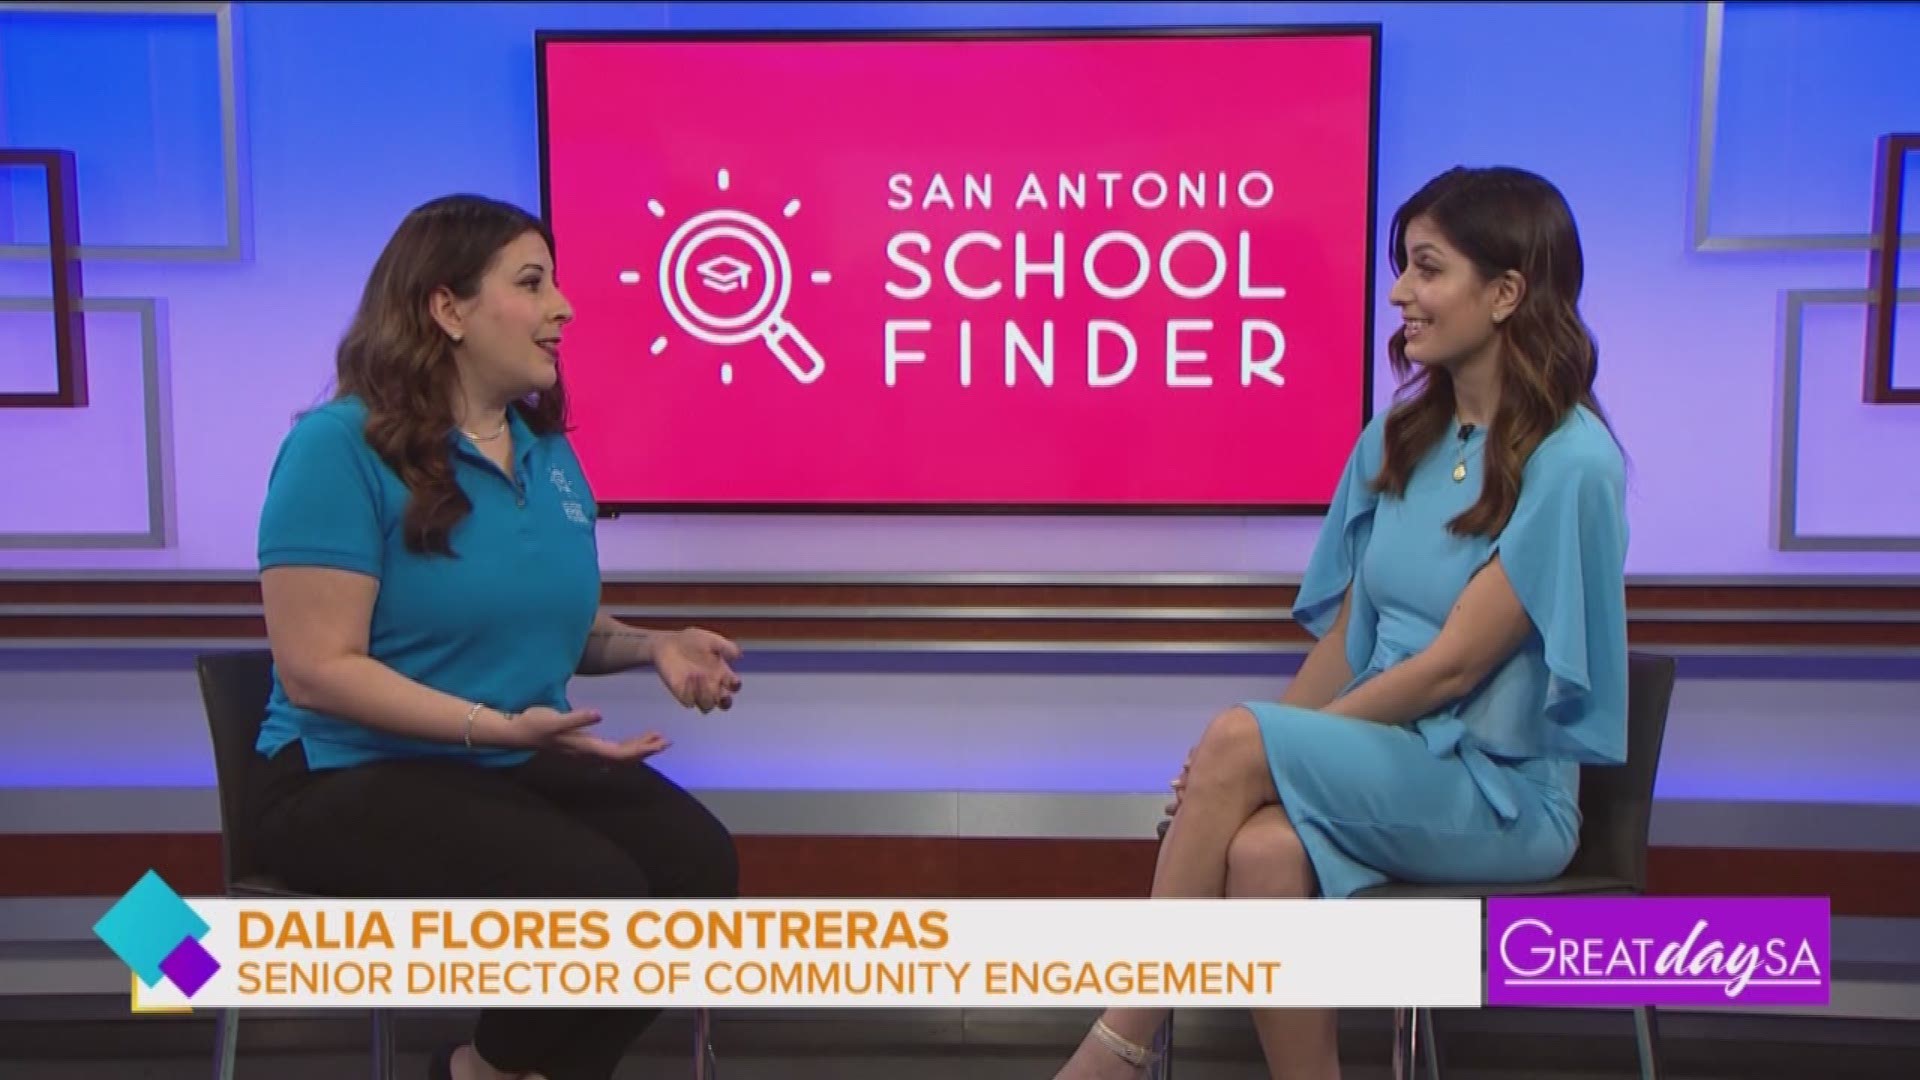 This Great Day SA story is sponsored by: San Antonio School Finder